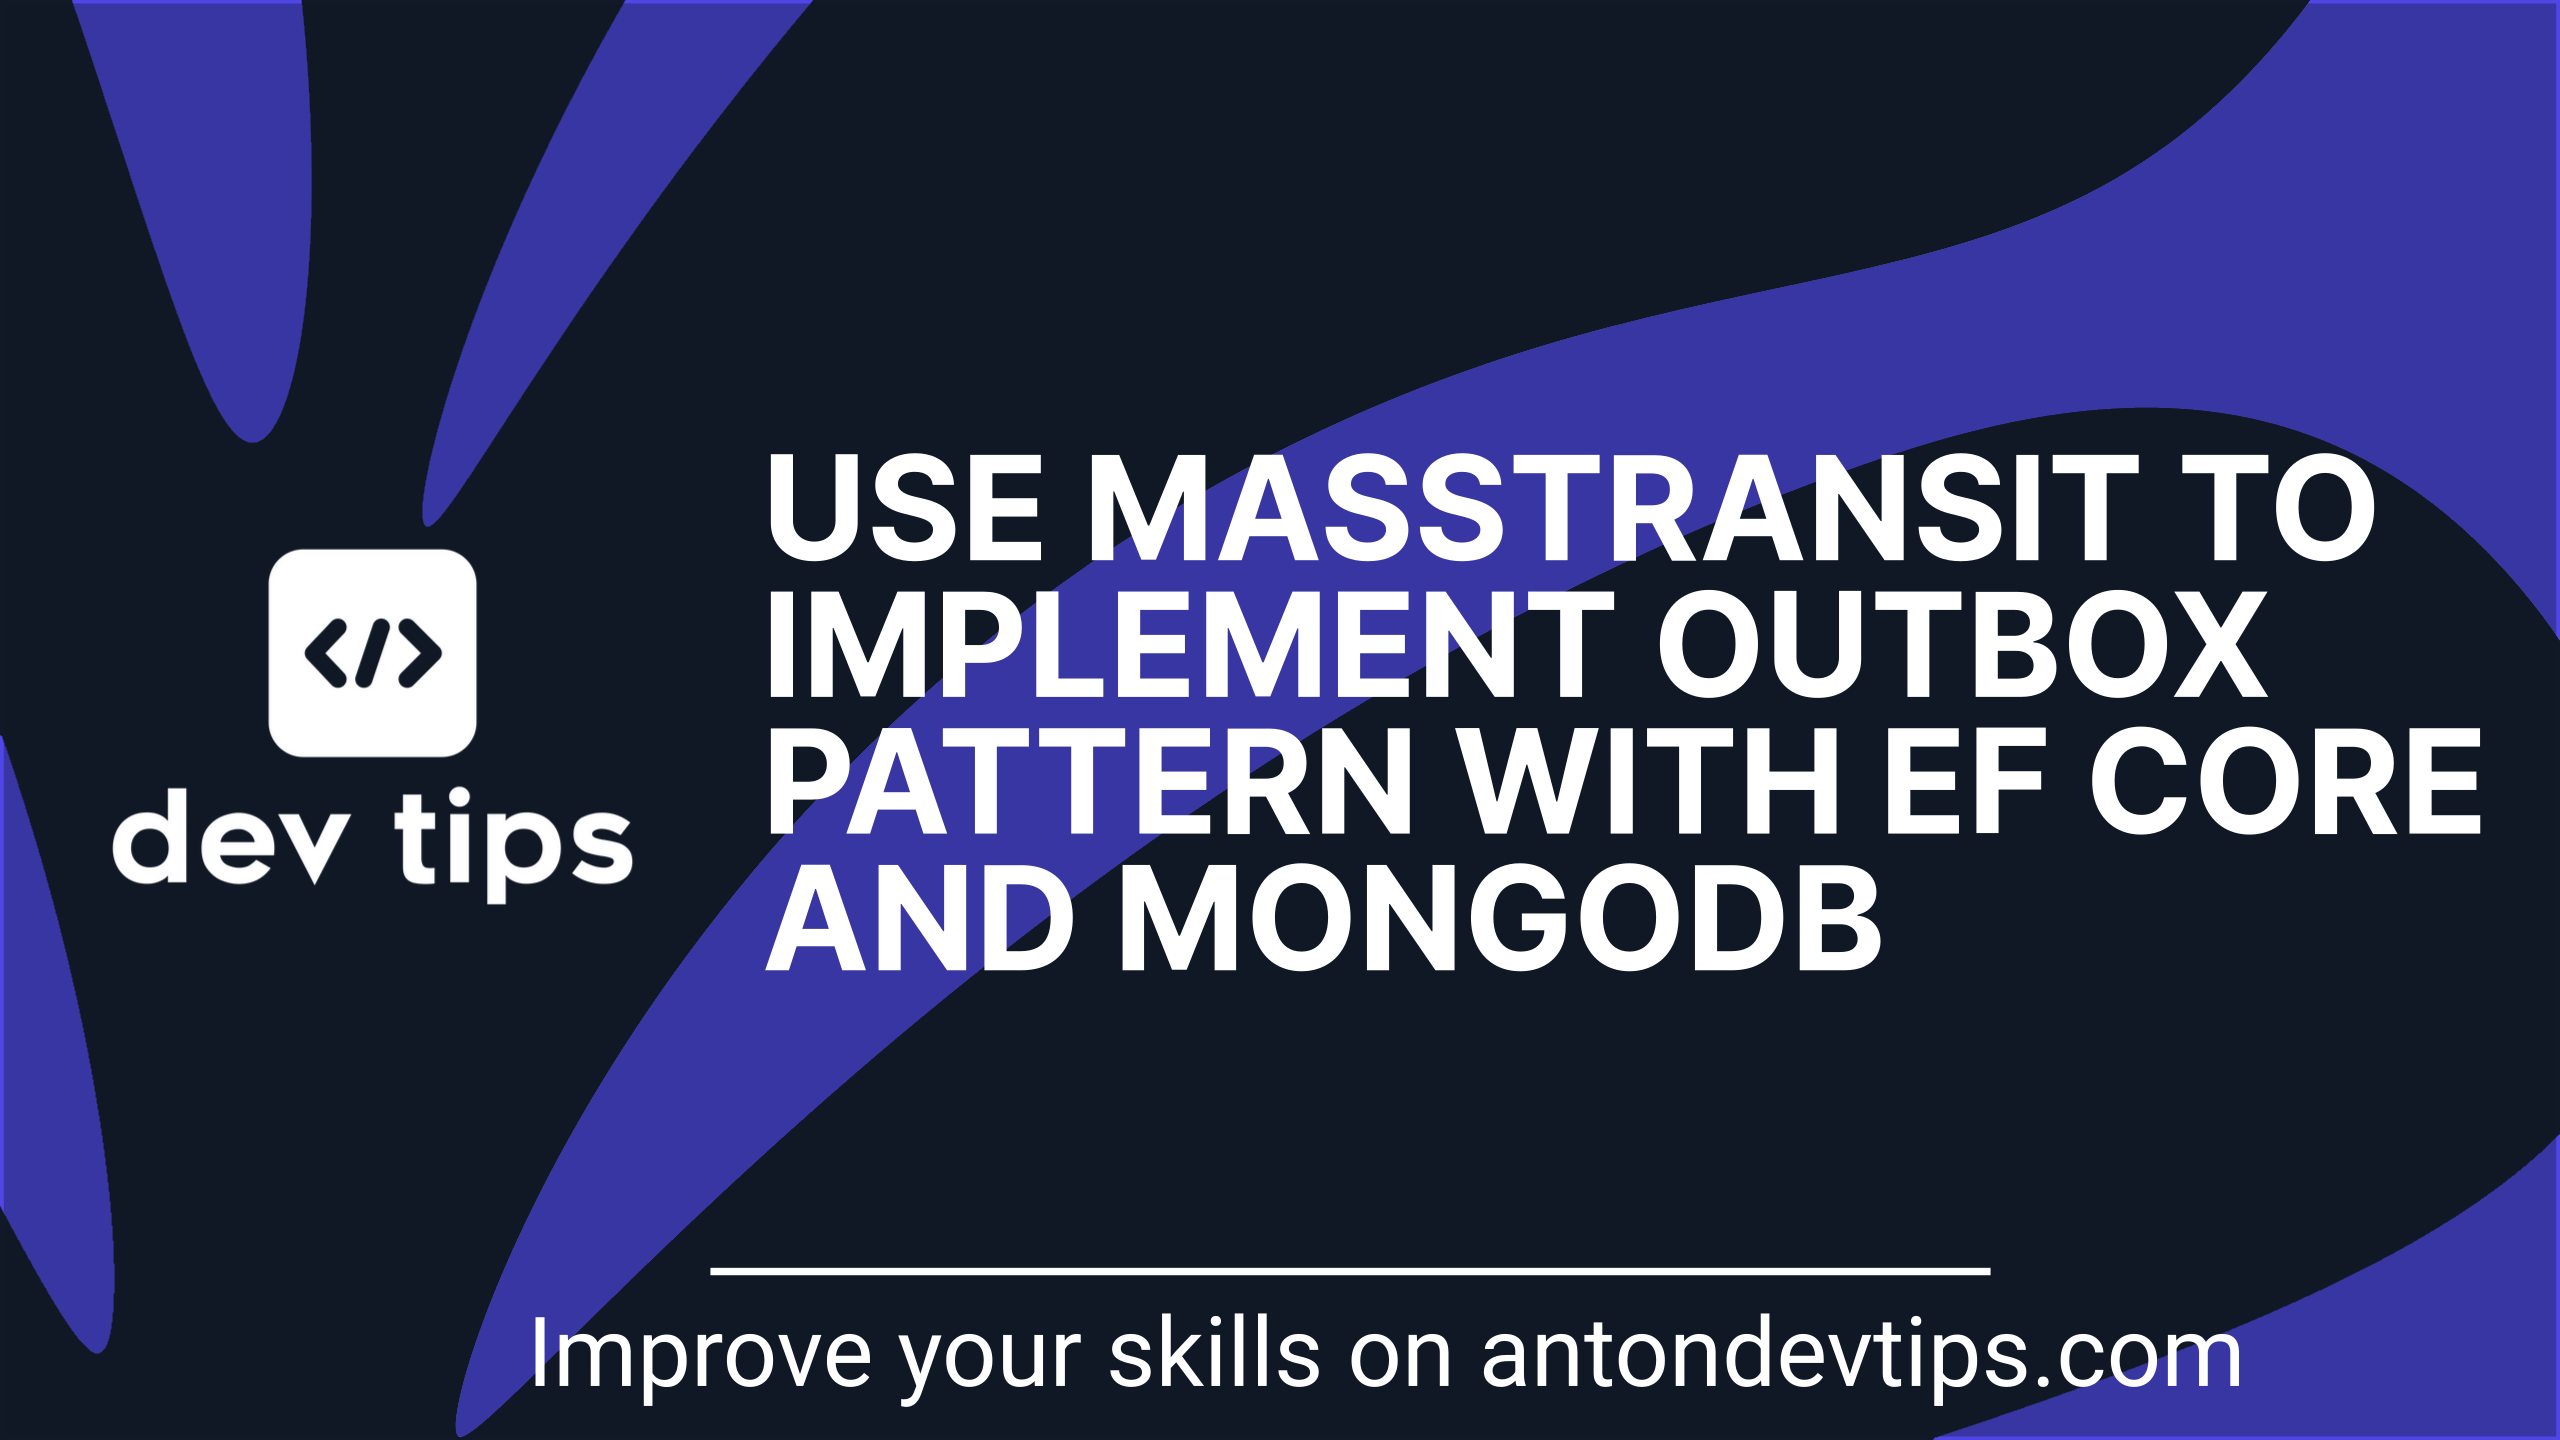 Use MassTransit To Implement OutBox Pattern with EF Core and MongoDB